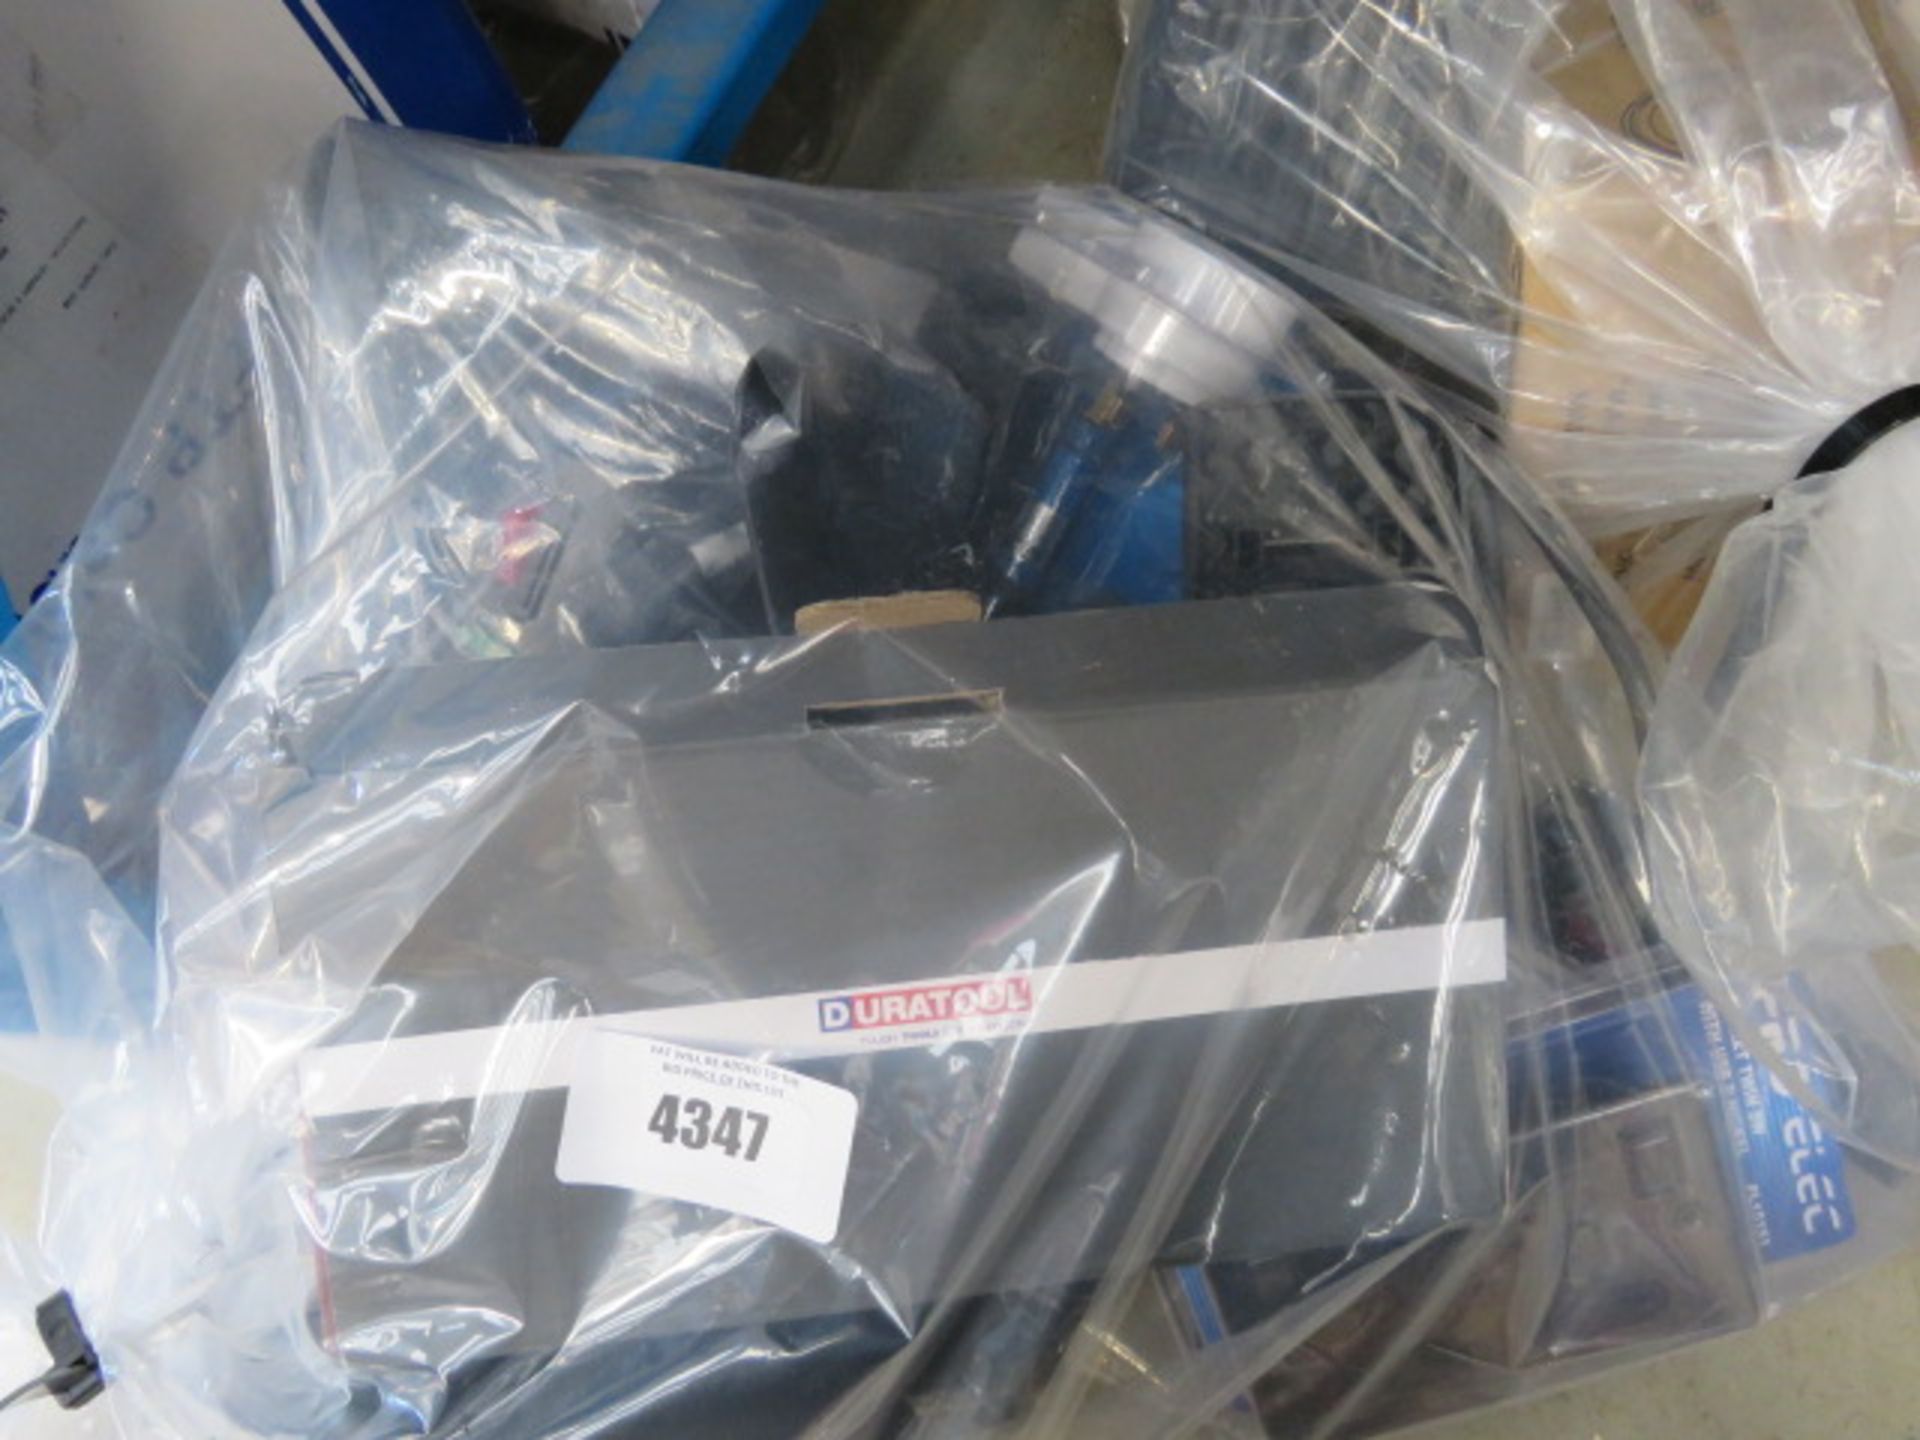 2 bags containing multi function tools, switches, sockets, lights, cables, smart bulb etc. - Image 2 of 3